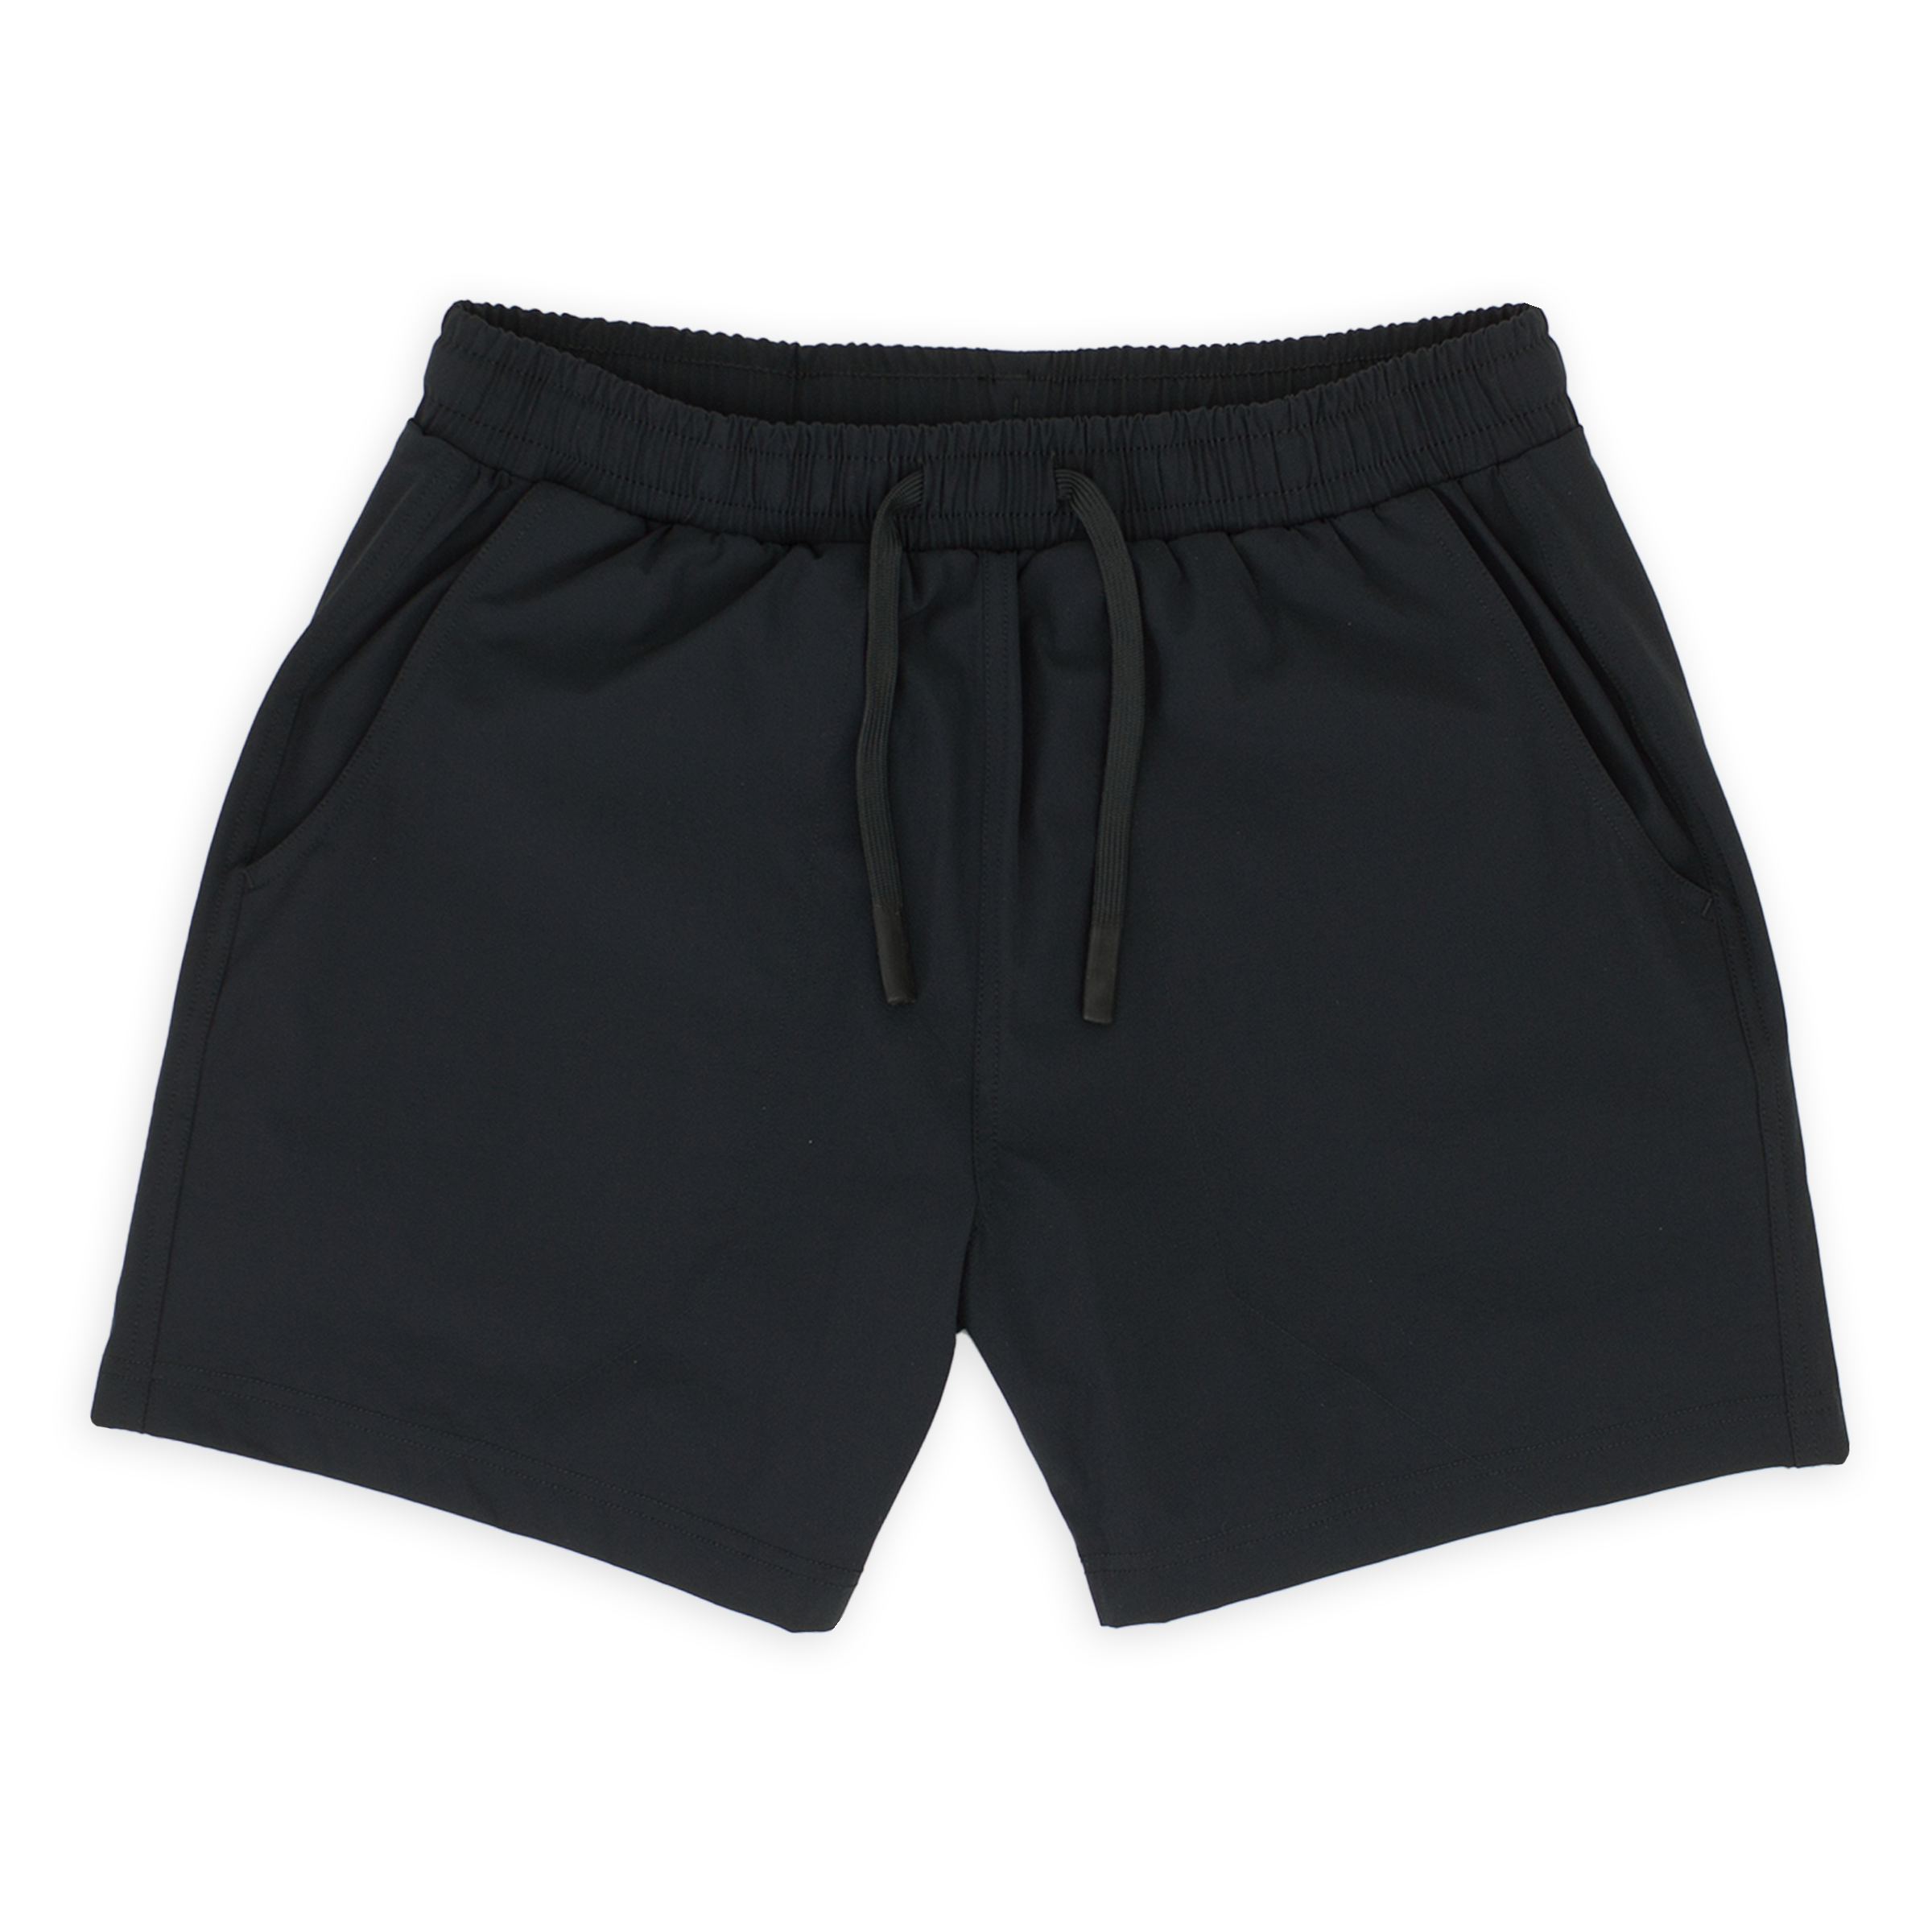 Base Short 5.5" Black front with elastic waistband, dyed-to-match flat drawstring with rubberized tips, and two seam pockets